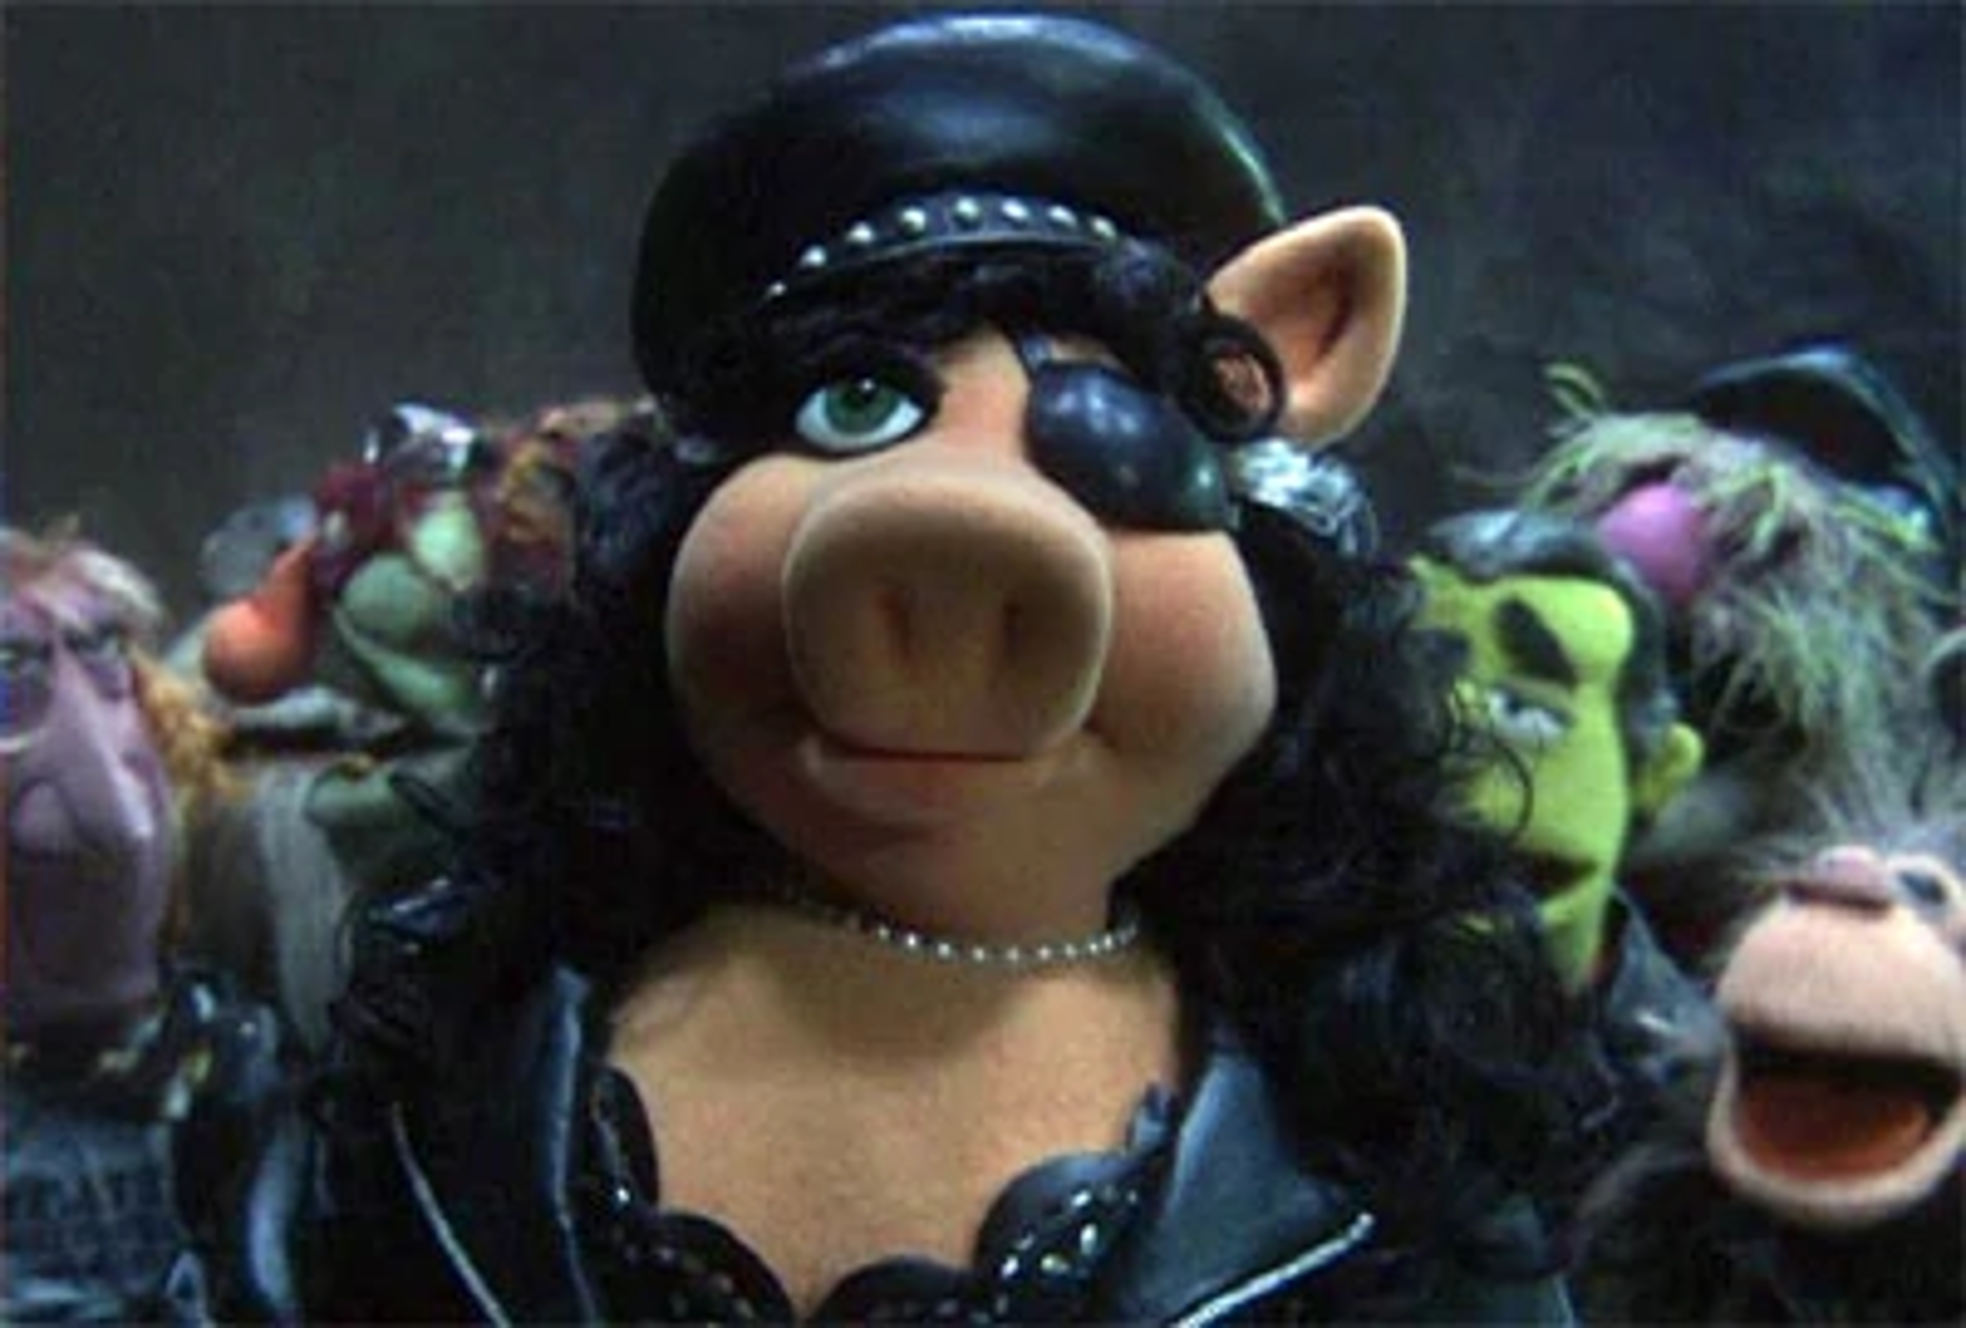 https://static.wikia.nocookie.net/villains/images/8/87/Miss_Piggy_the_Wicked_Witch_of_the_West.png/revision/latest?cb=20221016082918